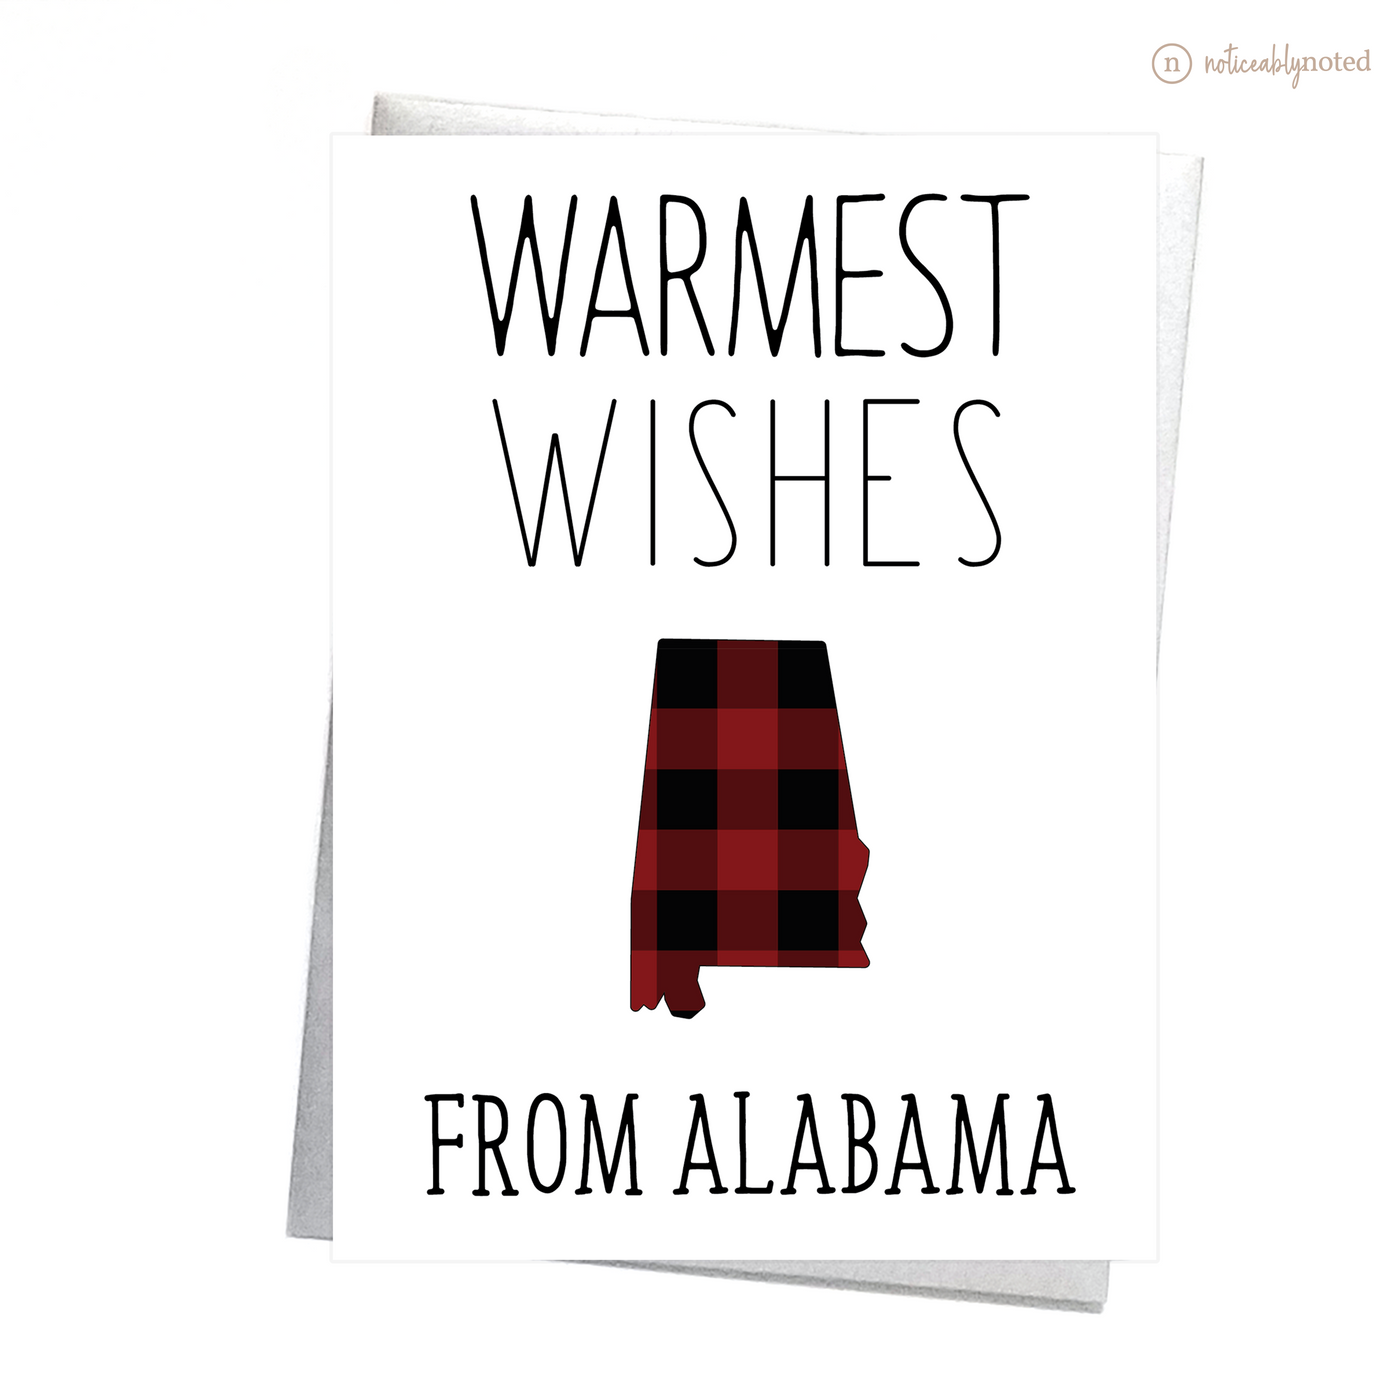 AL Holiday Greeting Cards | Noticeably Noted